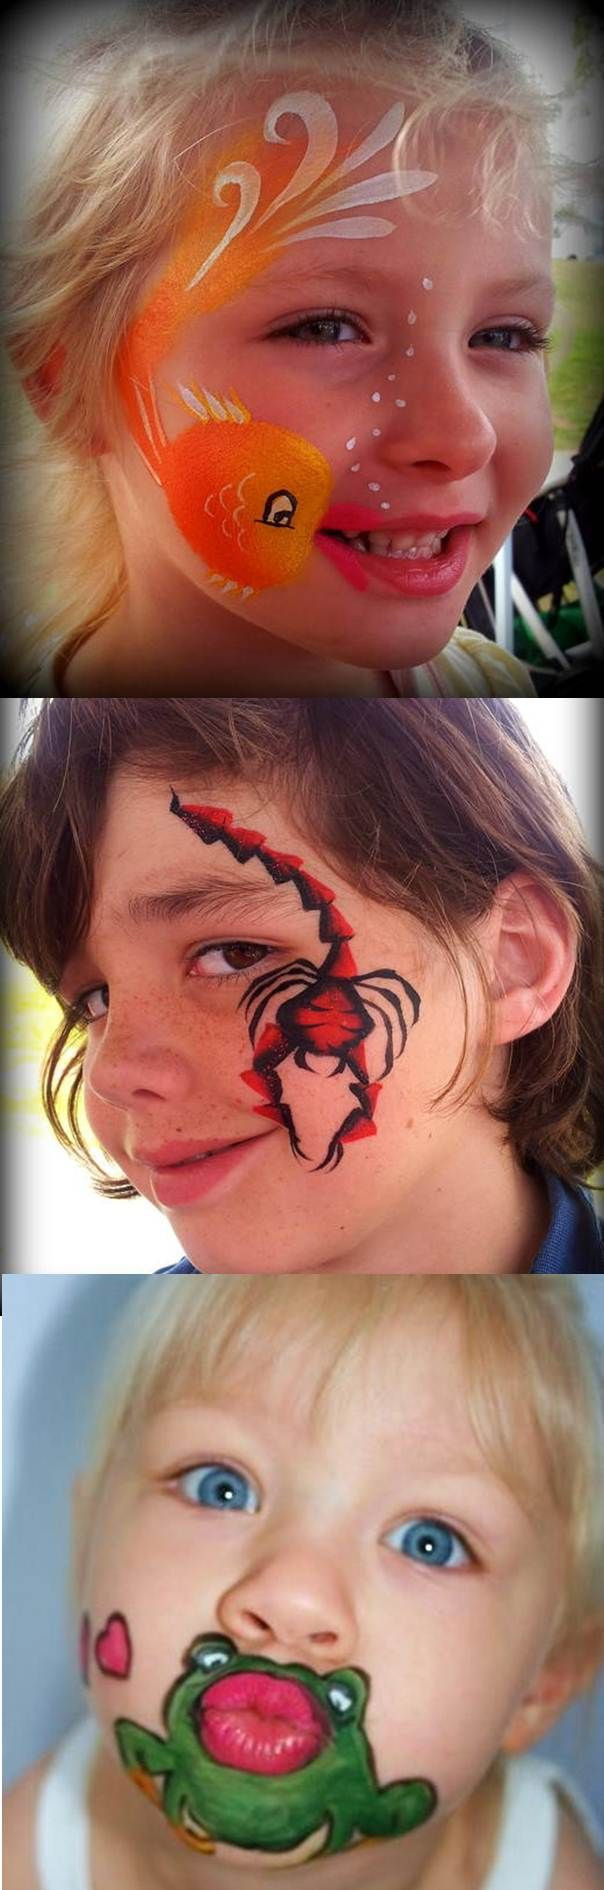 Face Painting Ideas For Kids Birthday Party
 Unusual ideas for eye catching and fun face paintings on